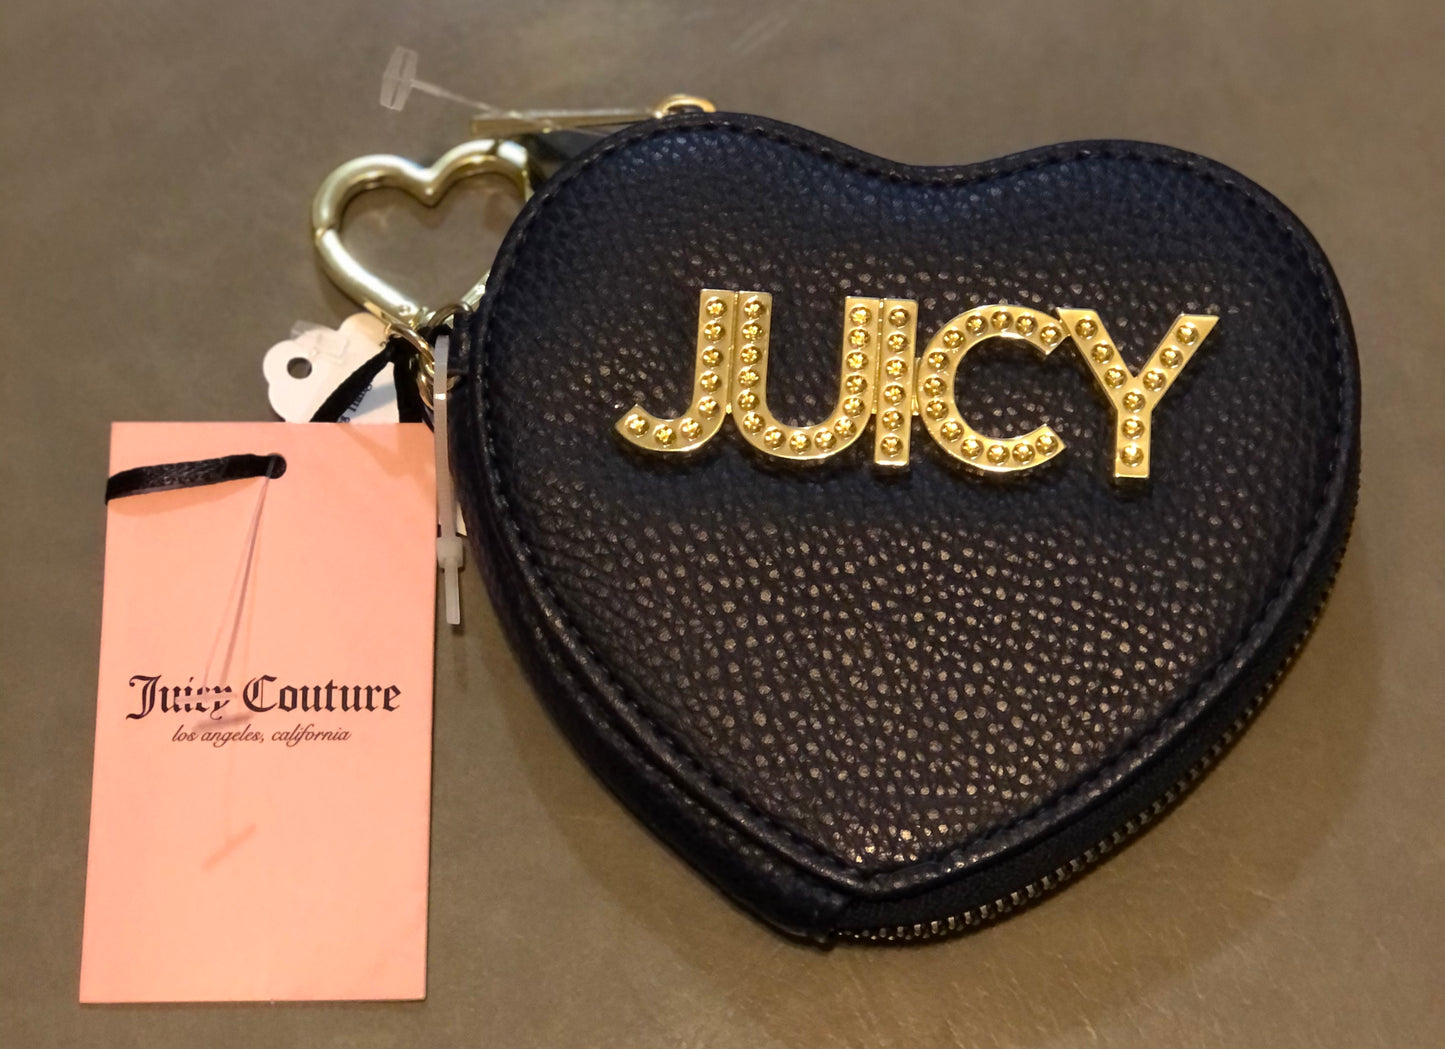 Juicy Couture Mini Coin Purse